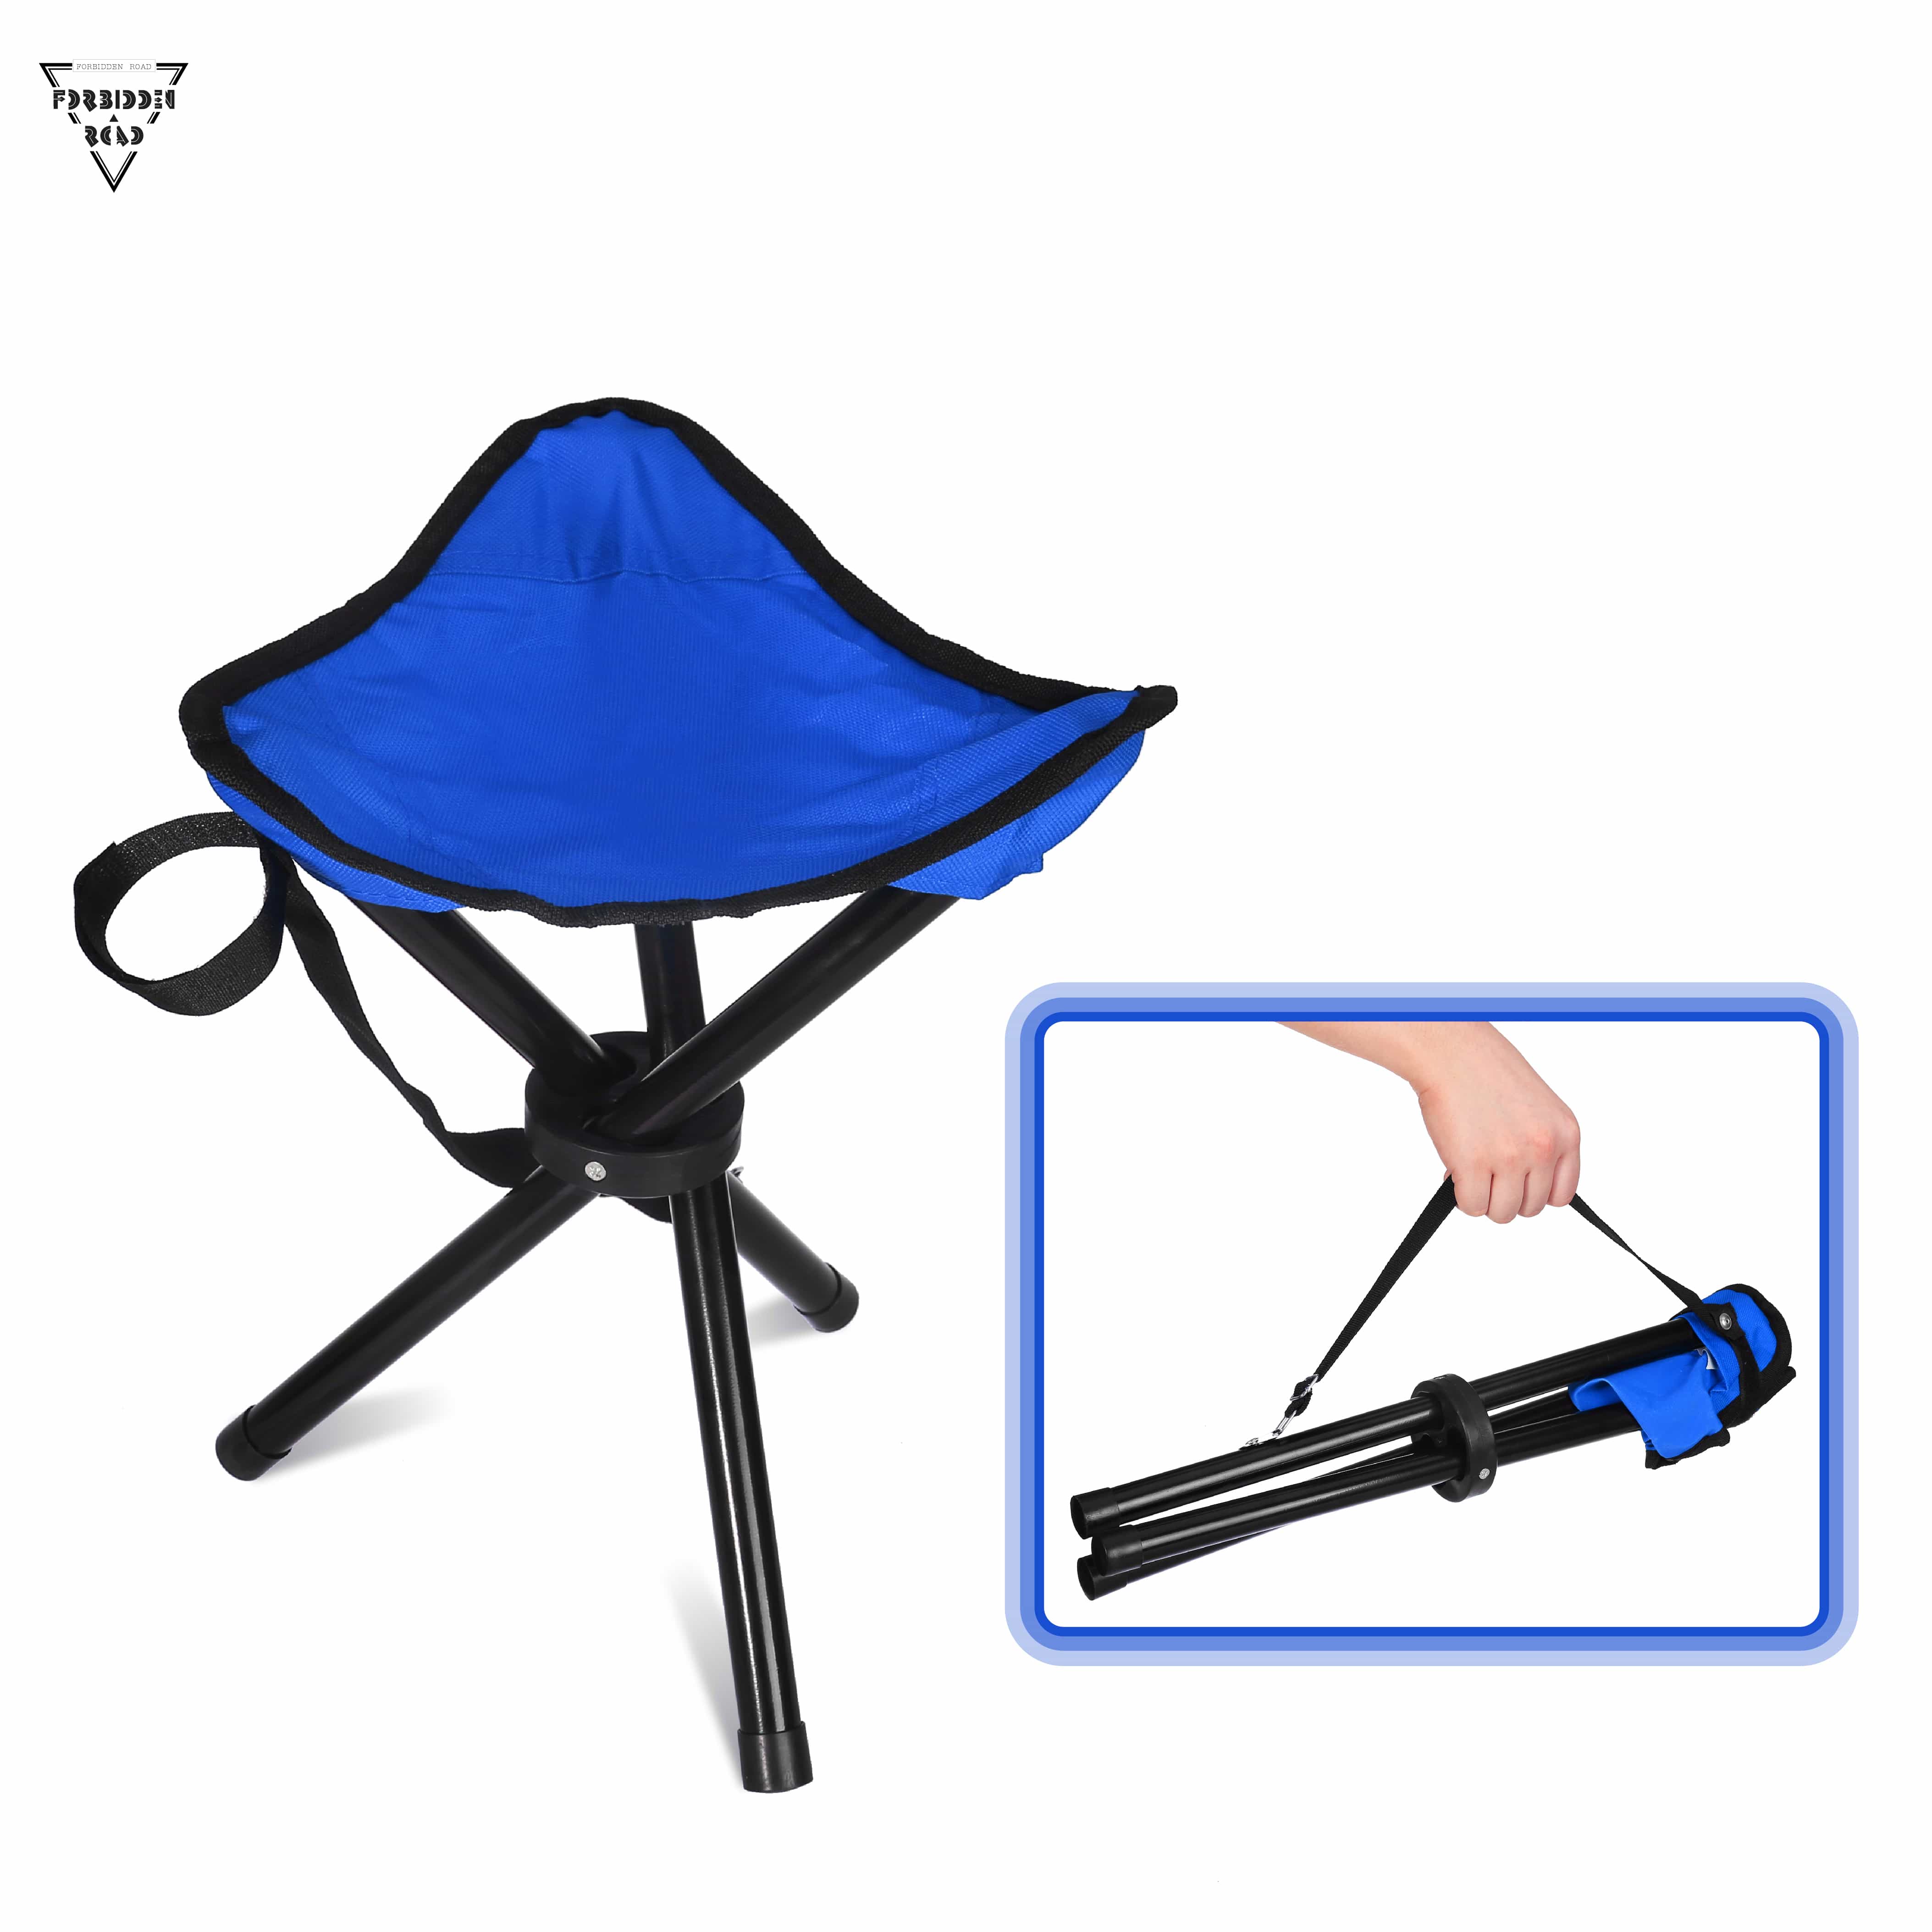 forbidden road camping stool portable seat tripod stool chair light folding  hiking fishing travel backpacking outdoor stool  blue